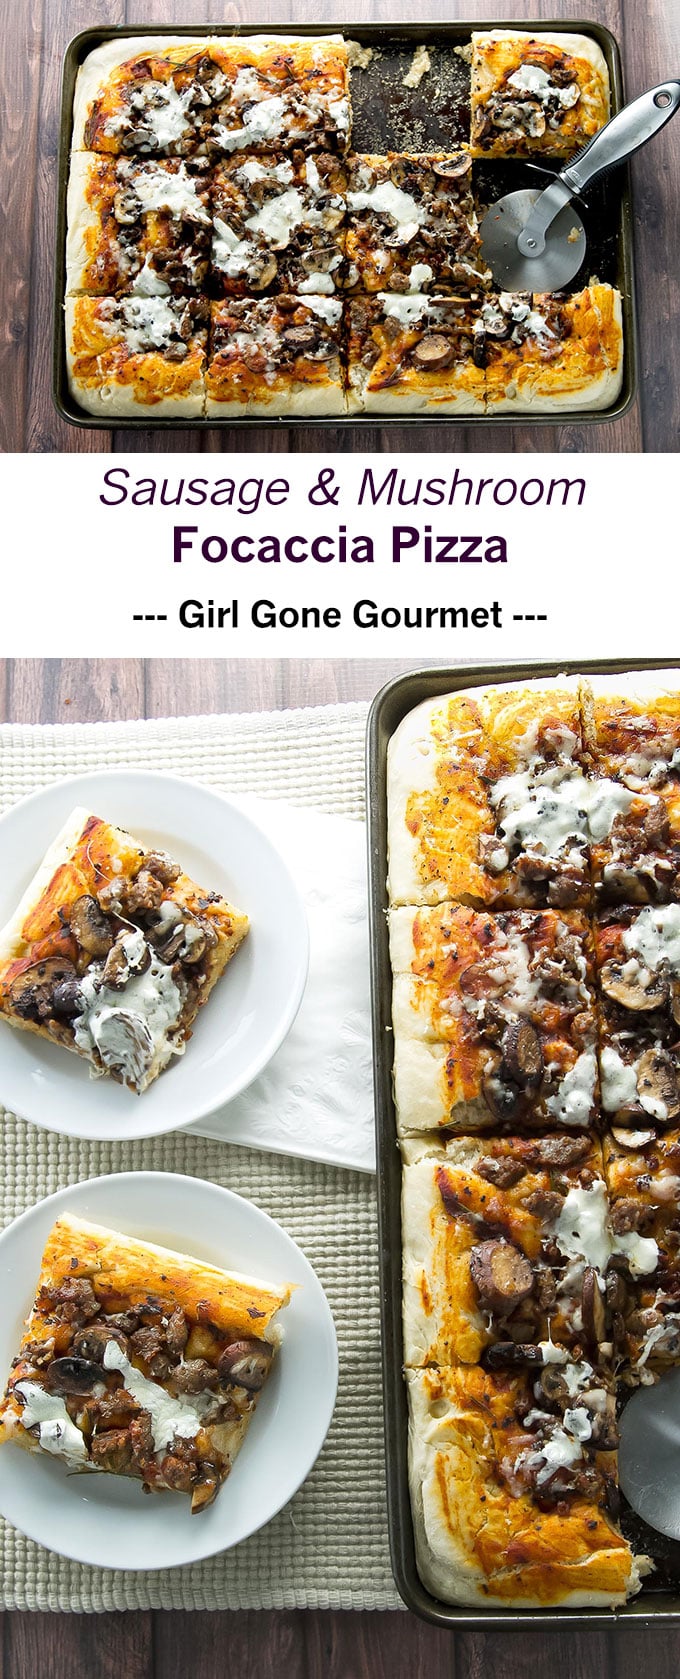 Pillow-y soft focaccia topped with Italian sausage, mushrooms, and cheese | girlgonegourmet.com